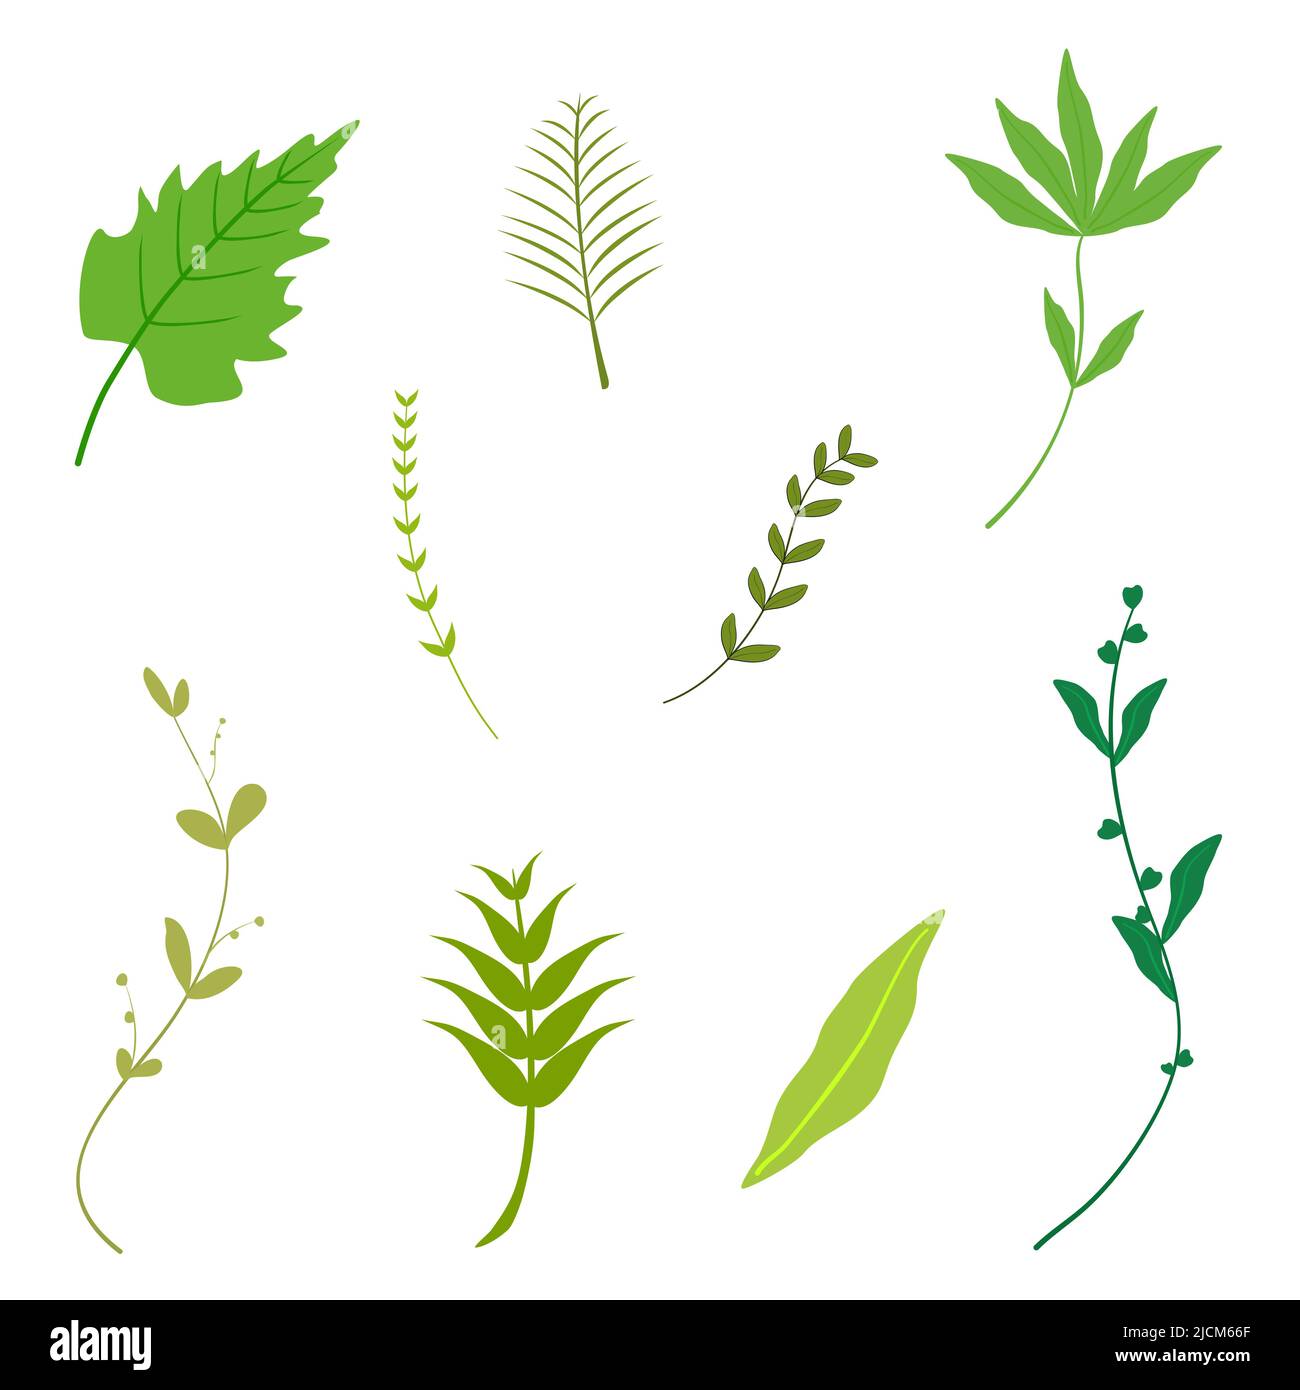 Green Leaf Isolated on White Background Vector Illustration Free Vector -  Web Design Hot